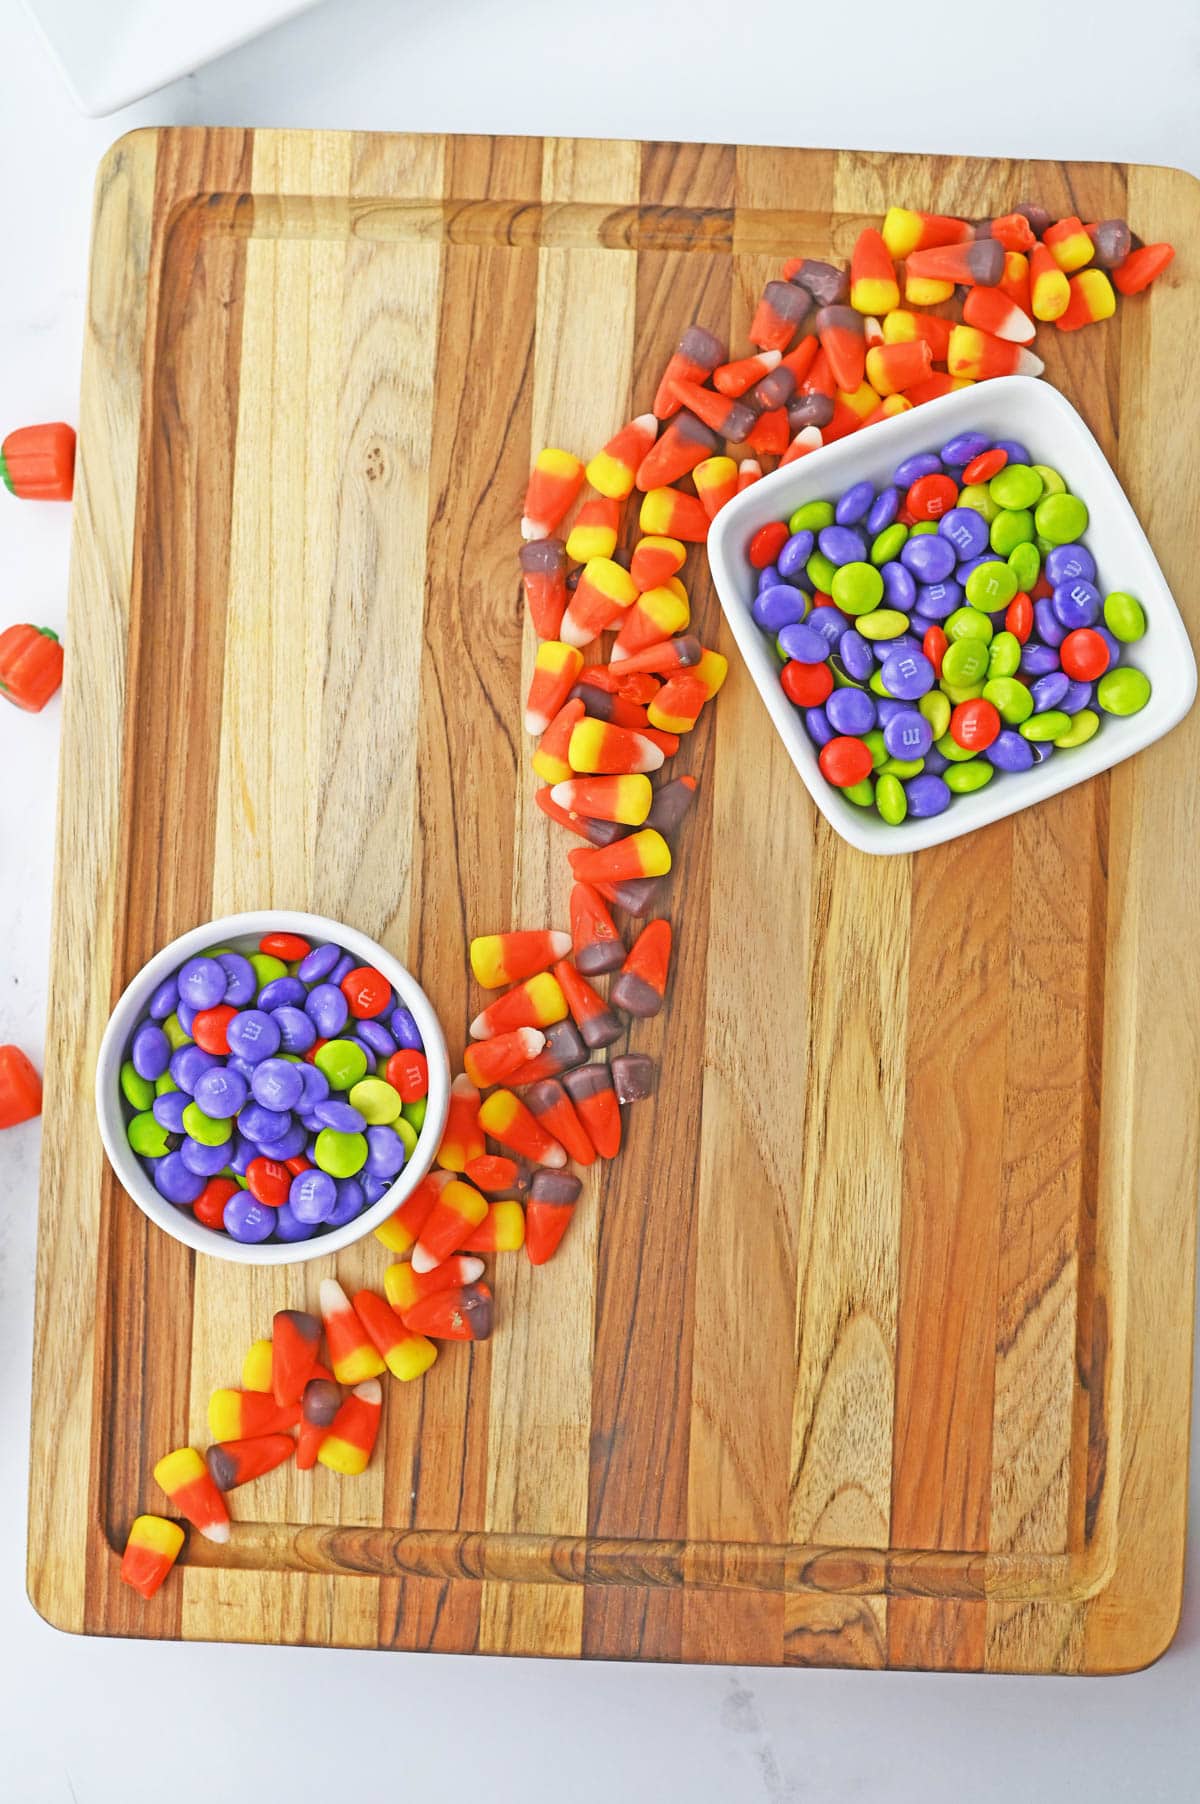 Candy corn on a wooden cutting board